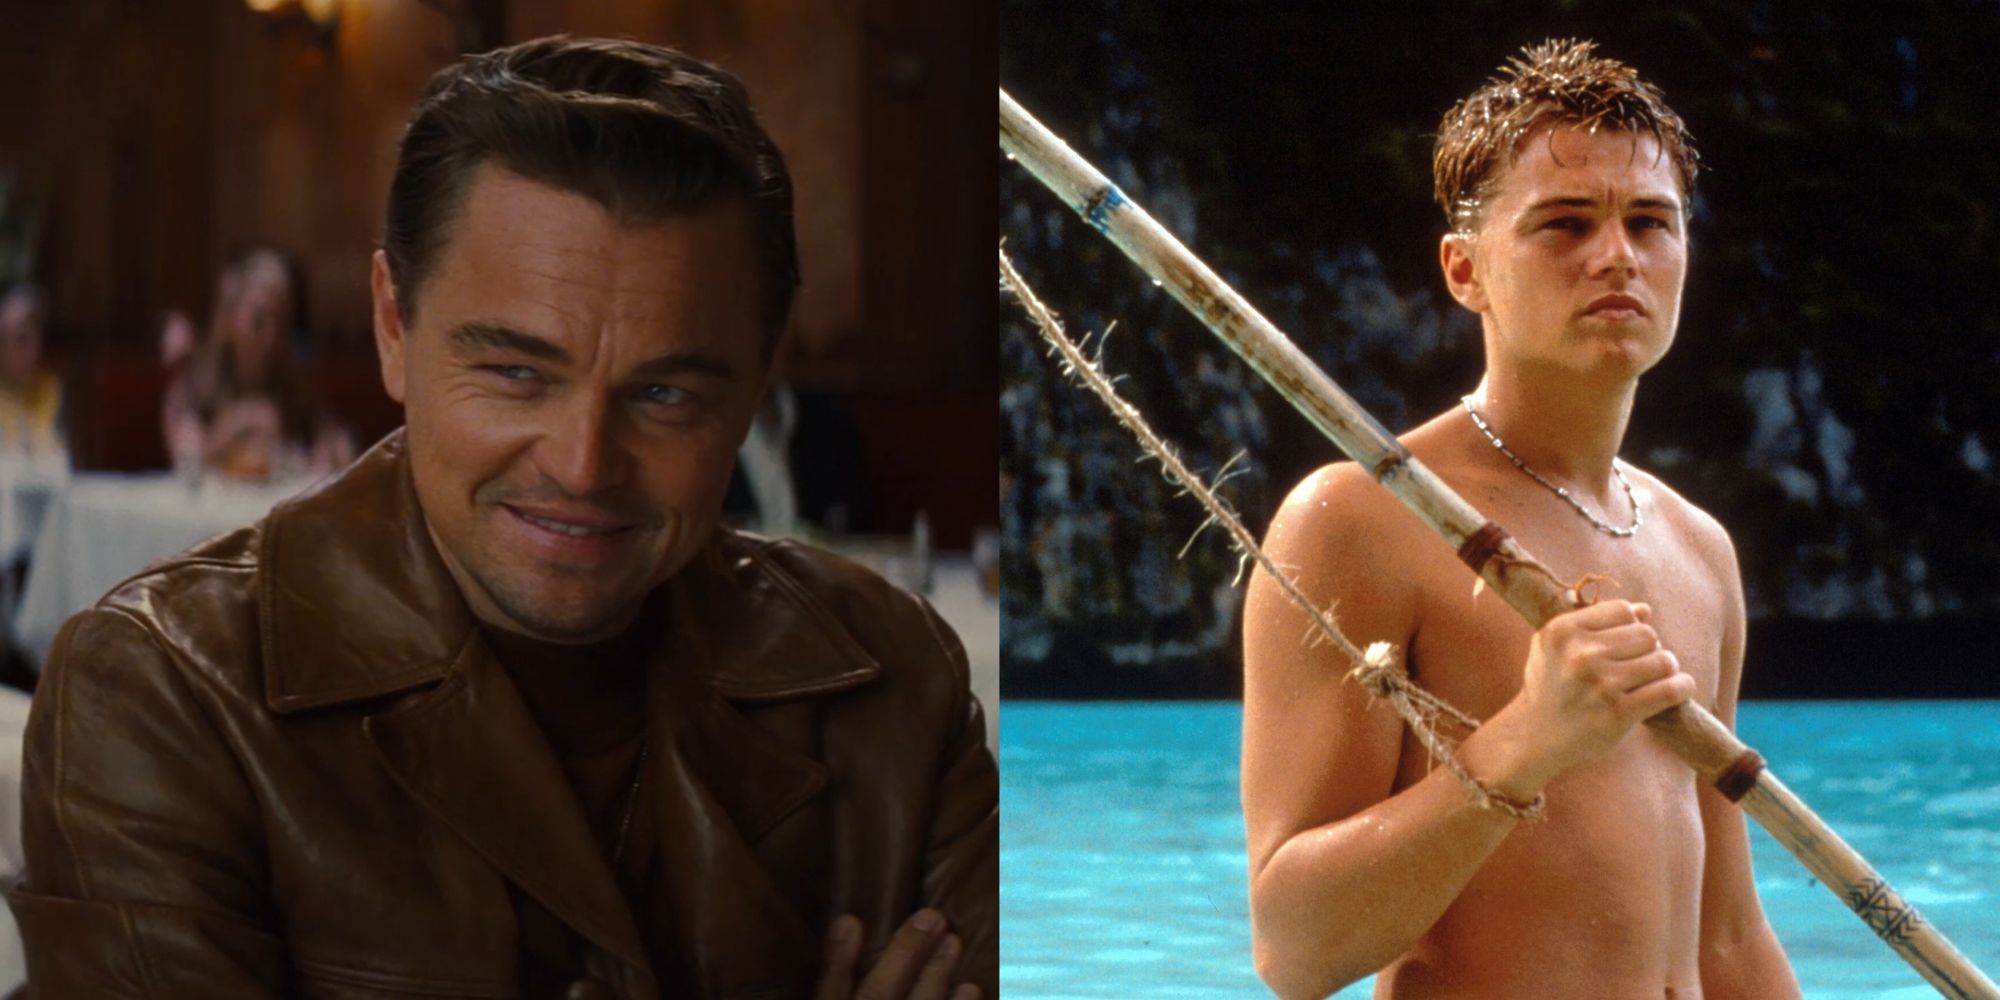 Split images of Leonardo DiCaprio smiling in Once Upon a Time in Hollywood and holding a fishing rod in The Beach